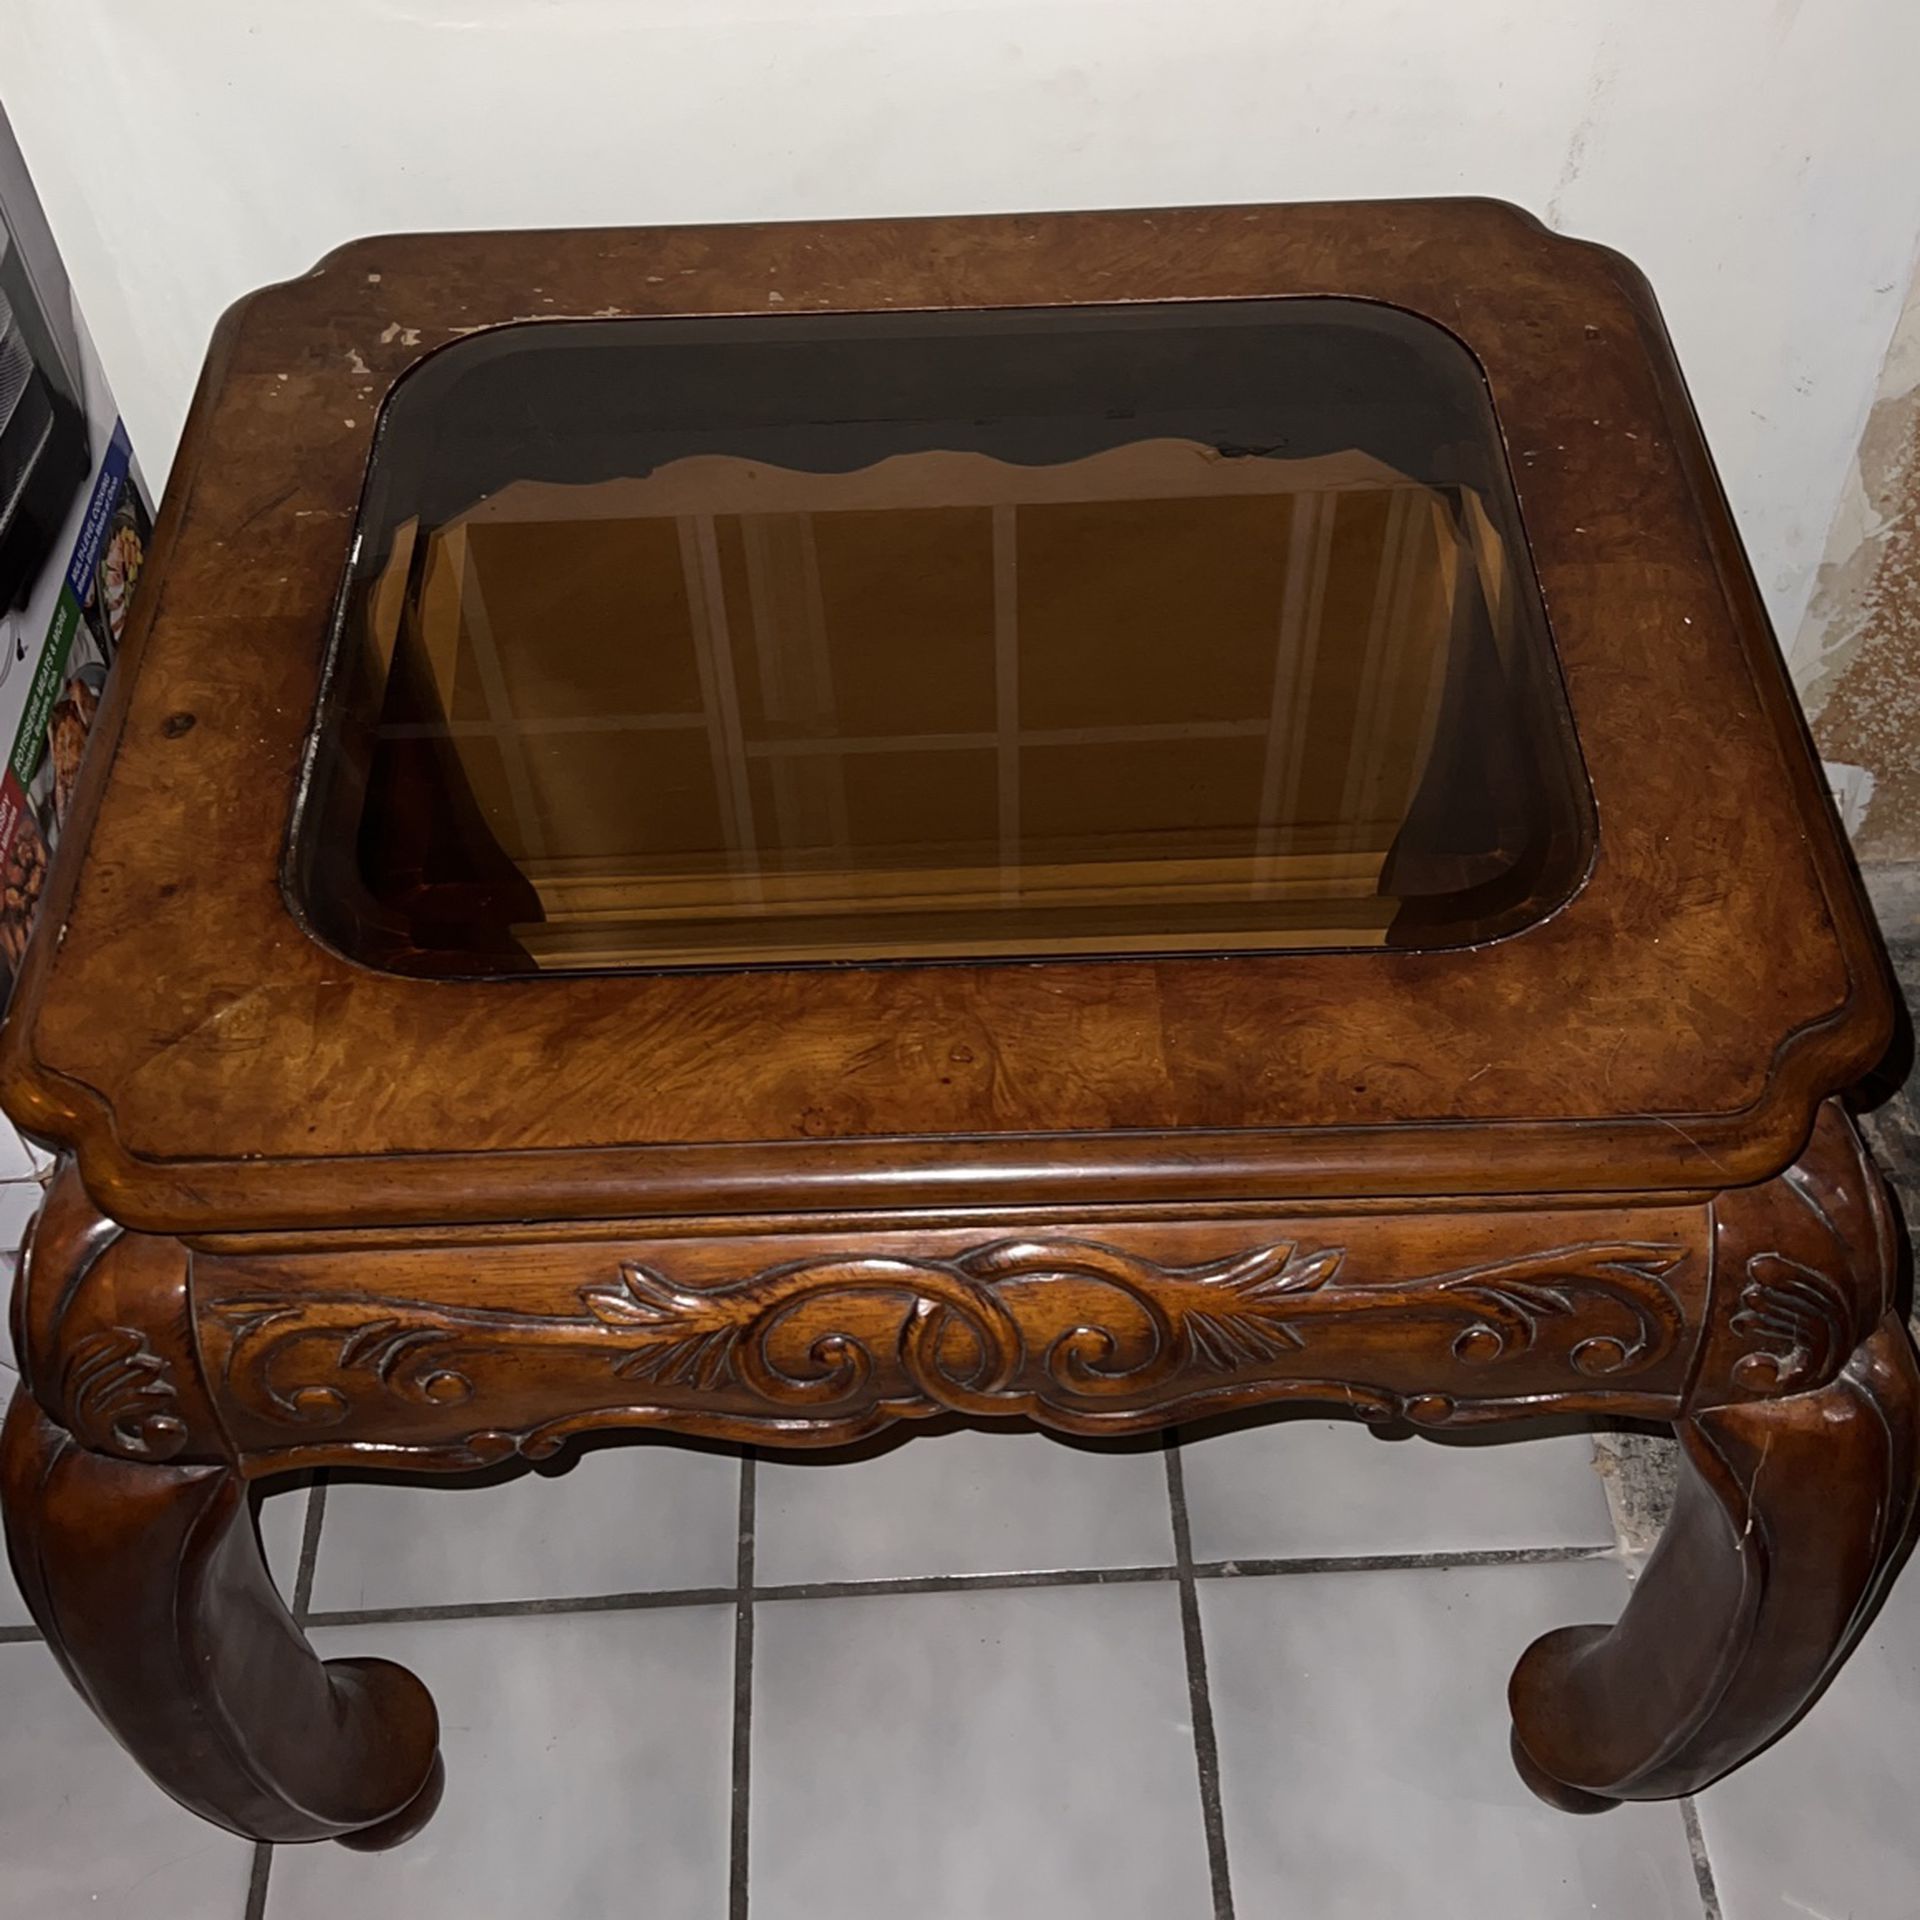 Solid Wood Antique Side Table With Glass Top This Is A One Of A Kind And Antique, Beautiful hand Carved Solid Wood Make Reasonable Offer 